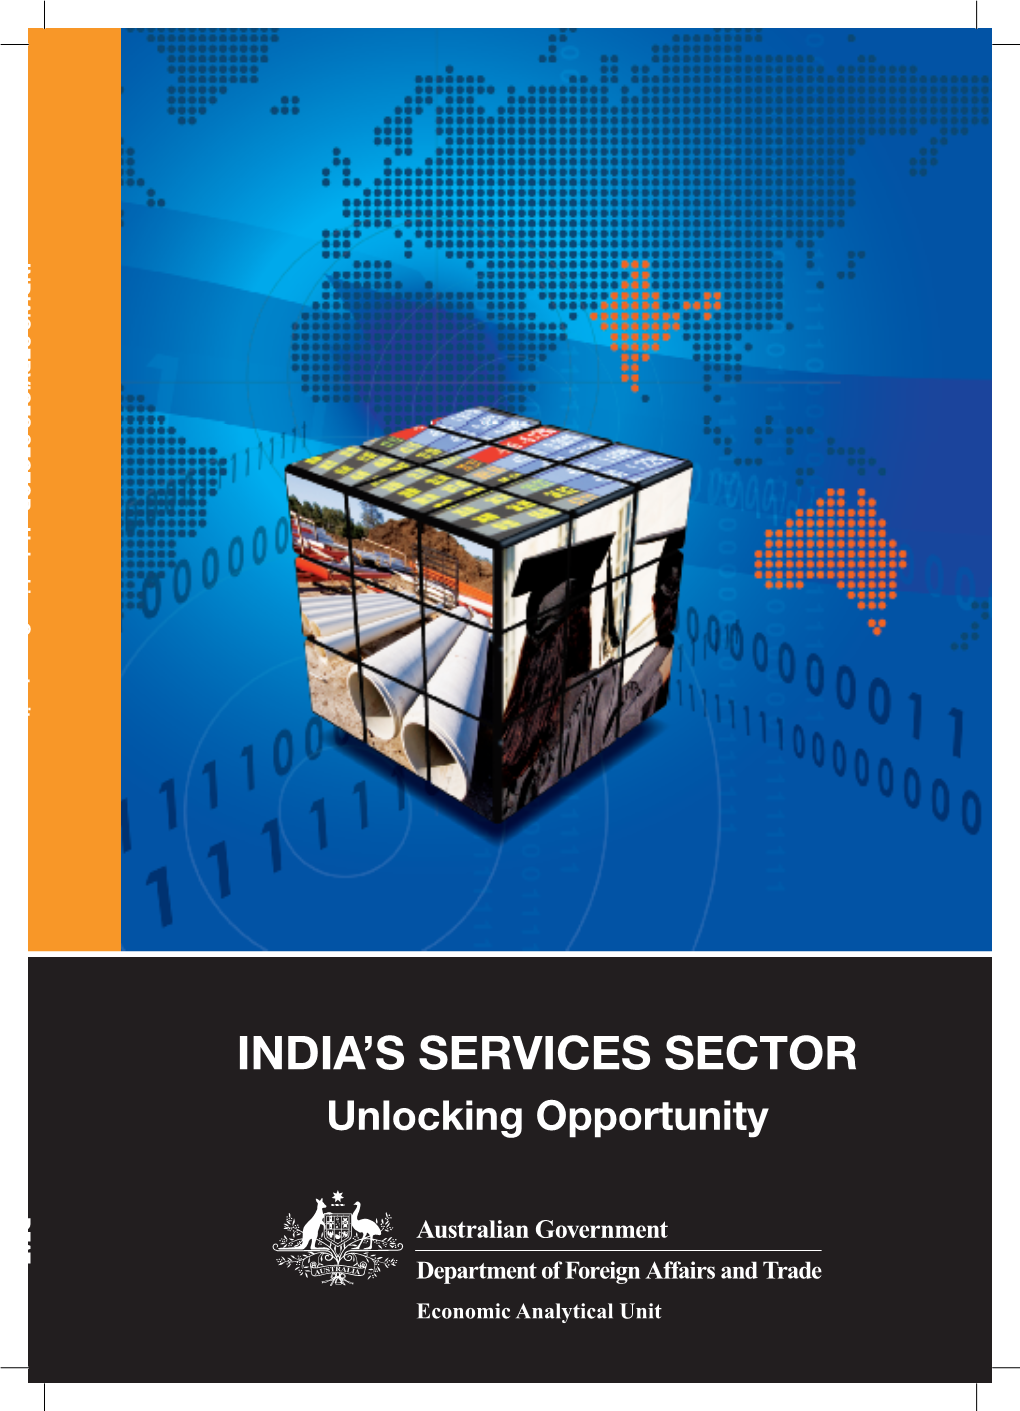 India's Services Sector